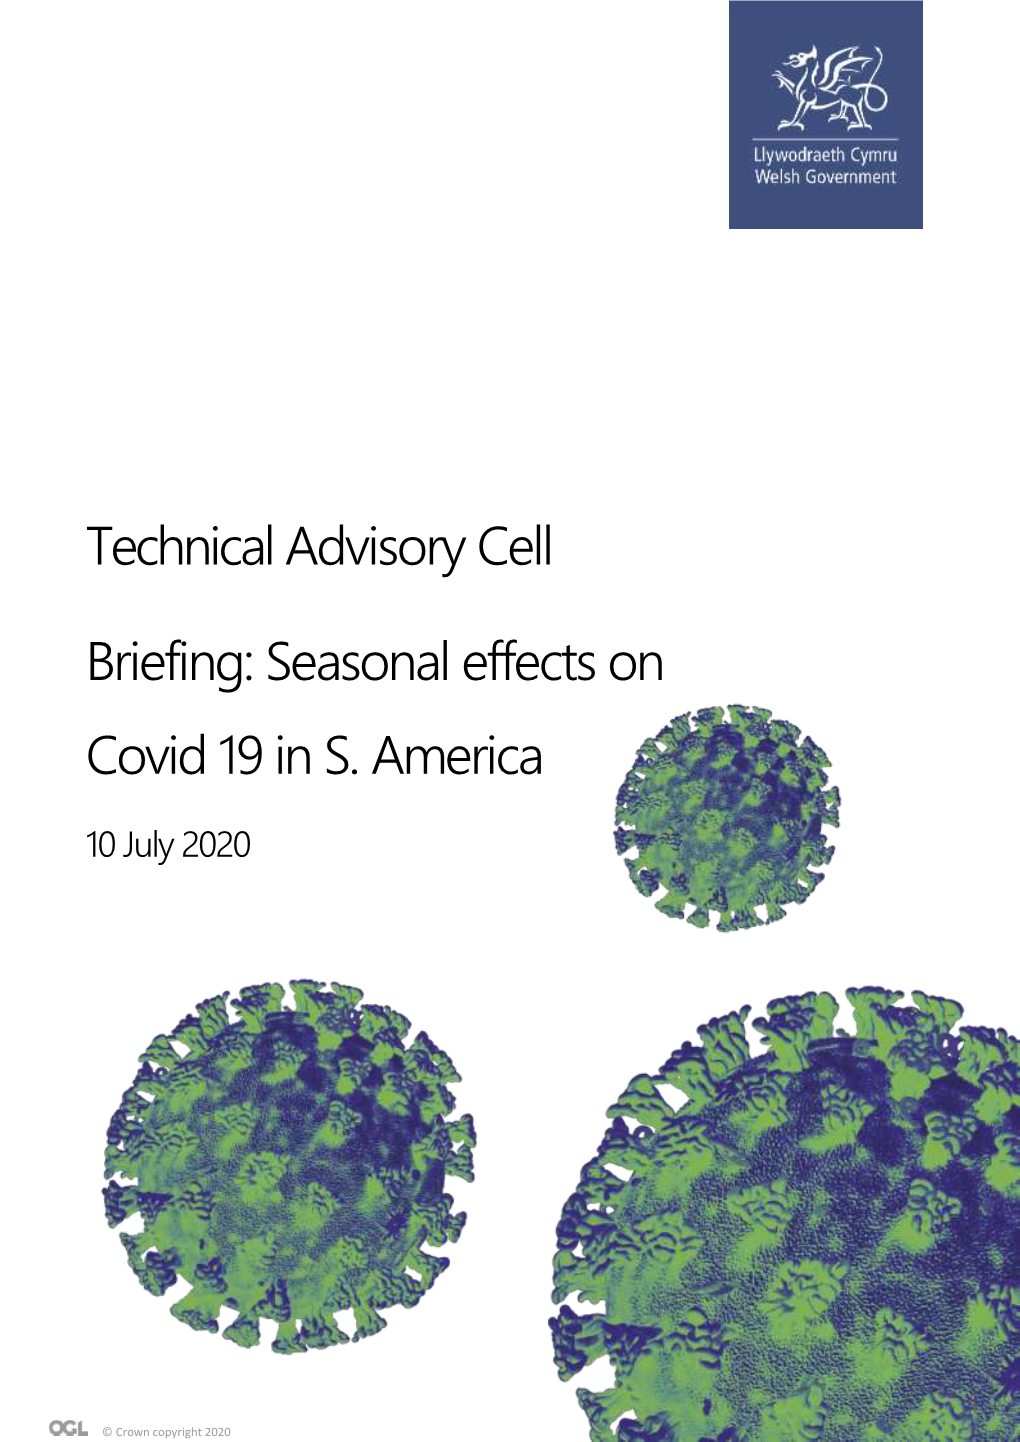 Technical Advisory Cell Briefing: Seasonal Effects on Covid 19 in S